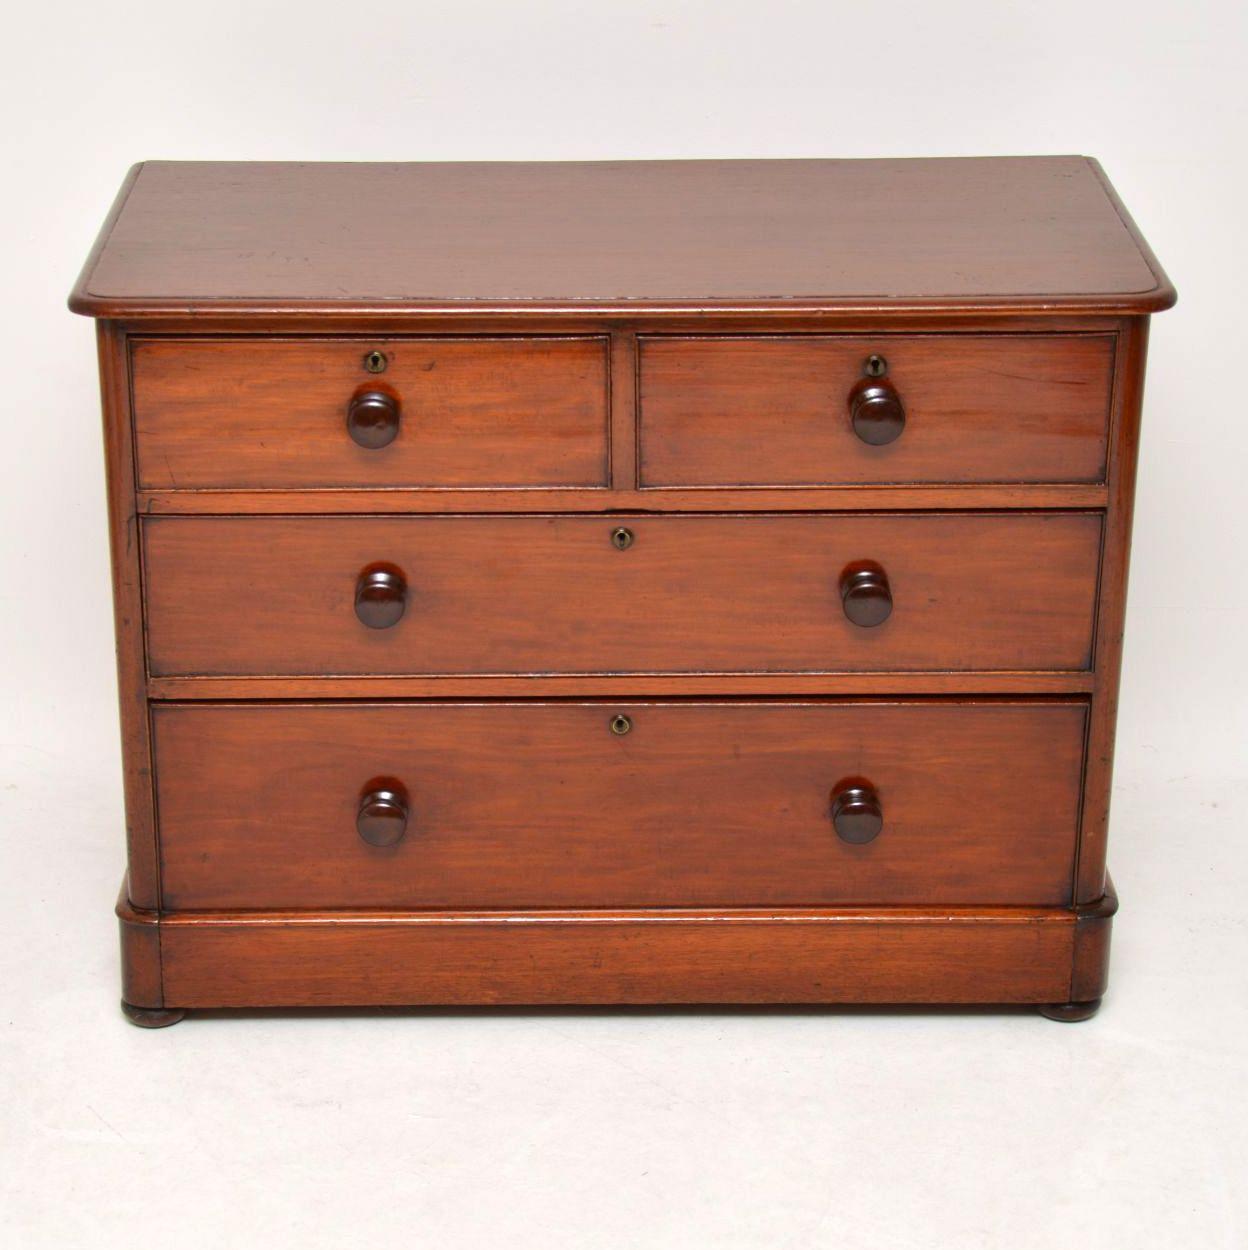 This antique Victorian mahogany chest of drawers has nice proportions, being a bit lower & wider than most. It has a solid mahogany top, original mahogany bun handles & sits on a plinth base with flat bun feet below. The locks & escutcheons are good